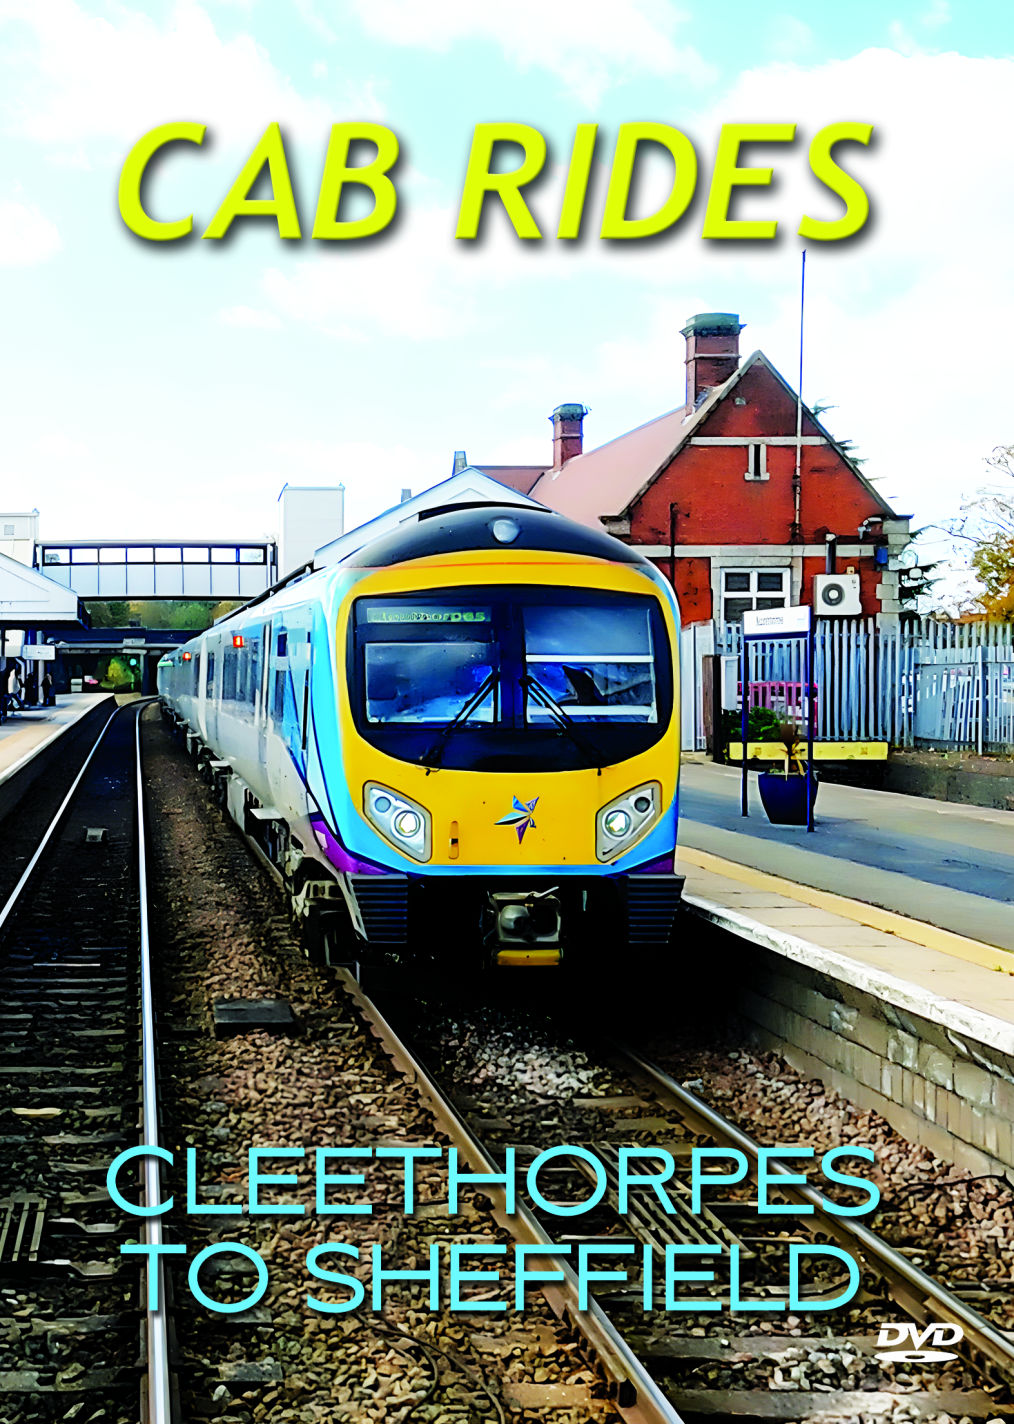 Cab Ride Cleethorpes to Sheffield